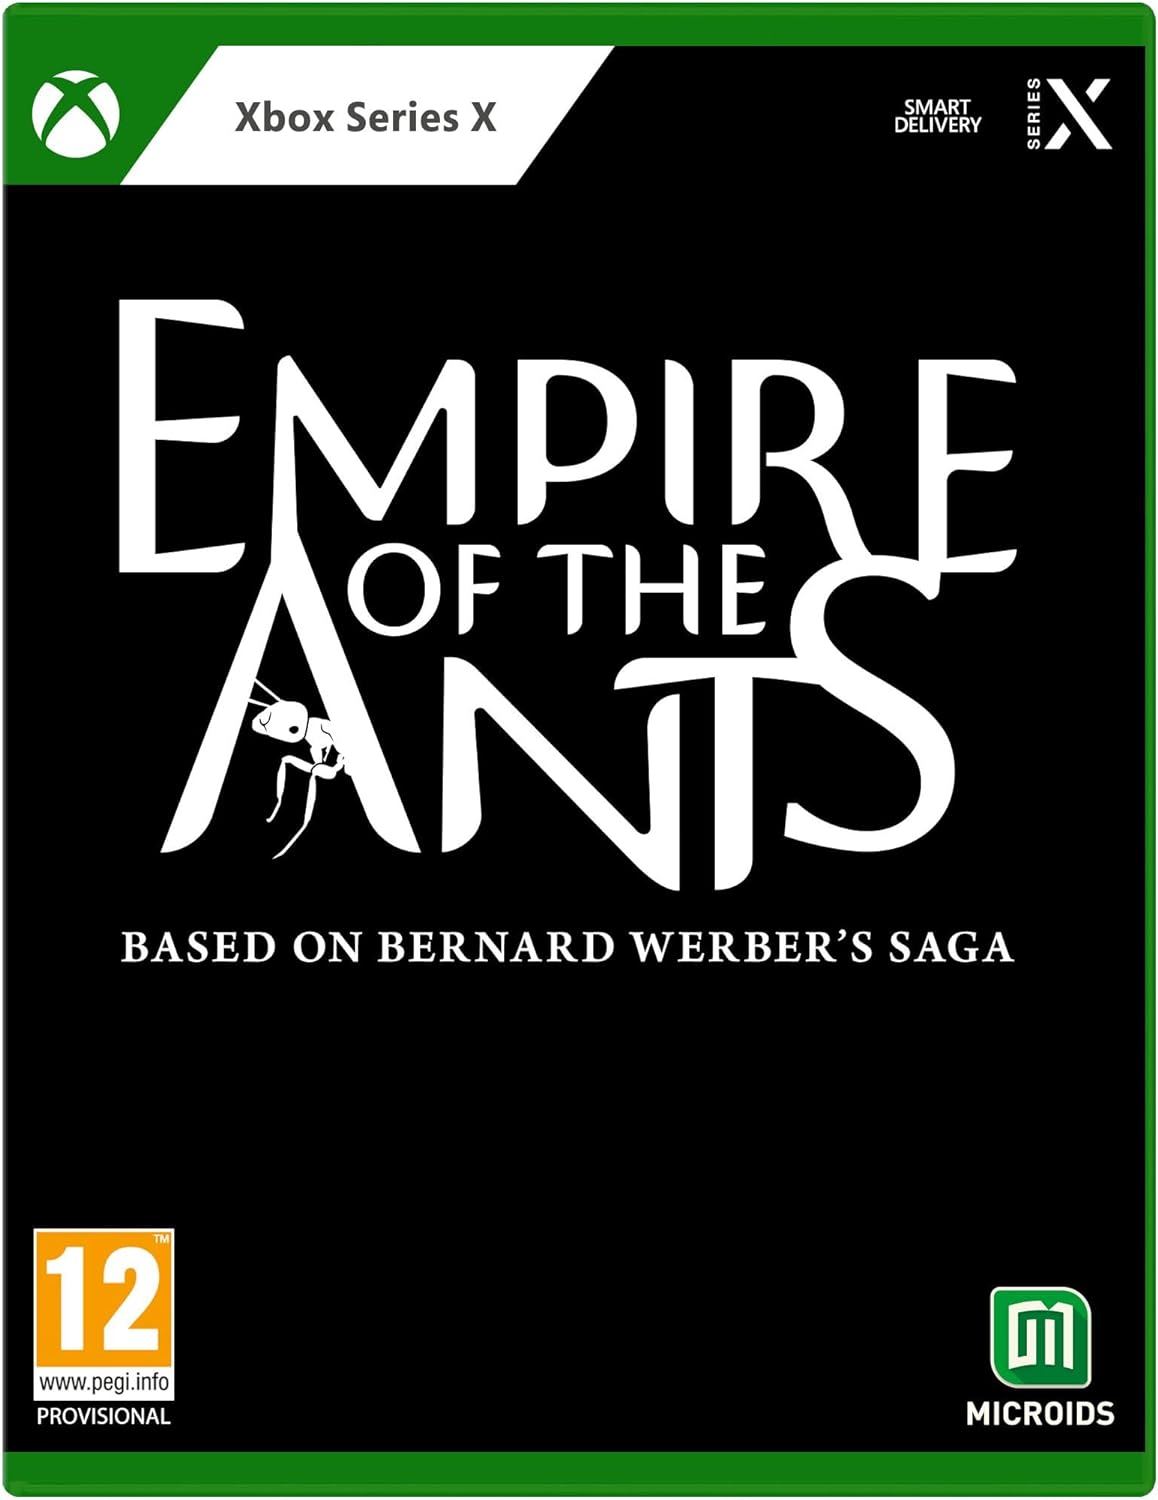 Empire of the Ants Limited Edition Xbox Series X Game